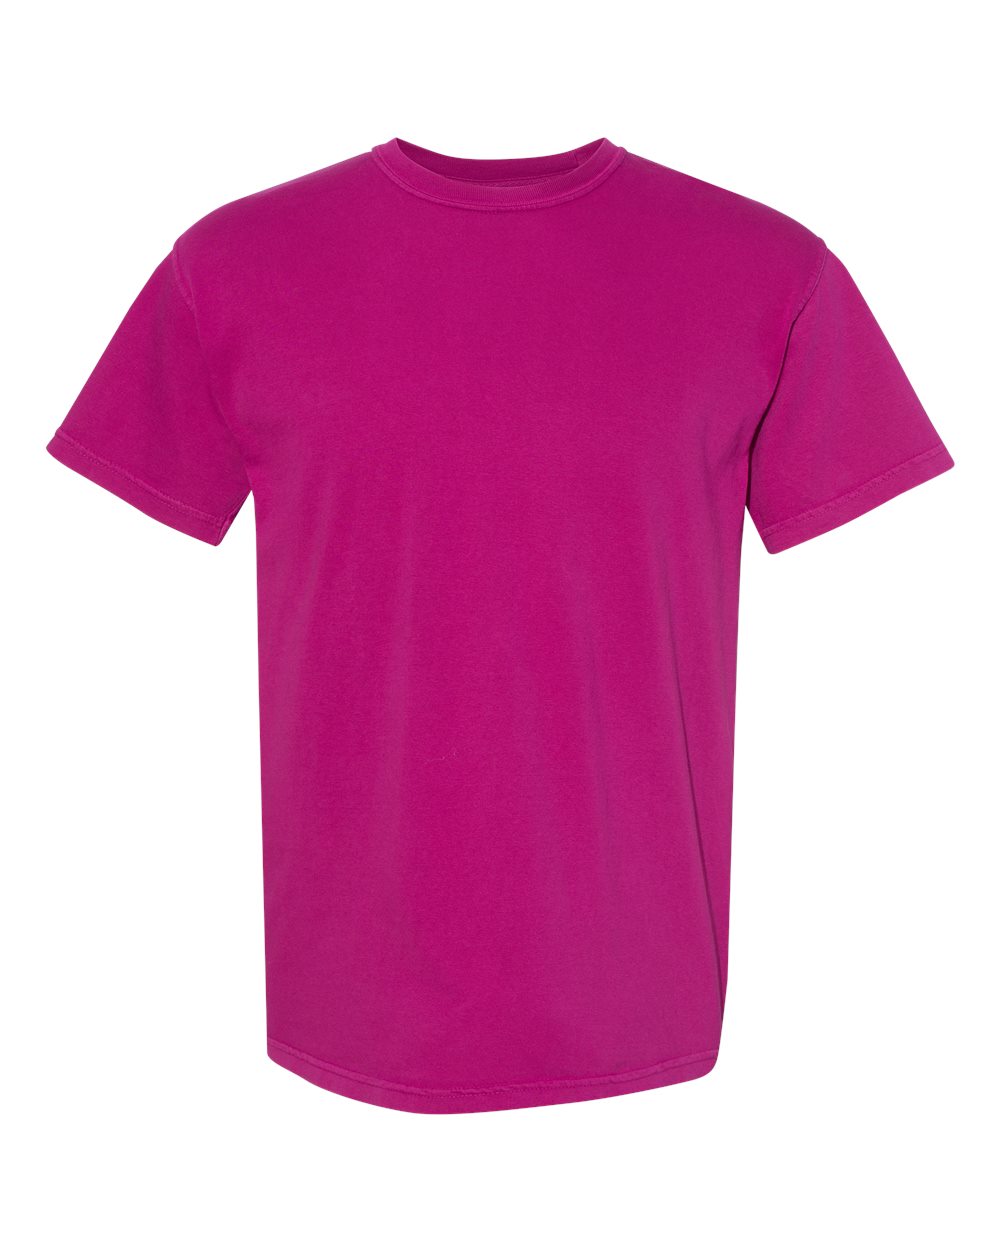 Comfort Colors Garment-Dyed Tee (1717) in Boysenberry